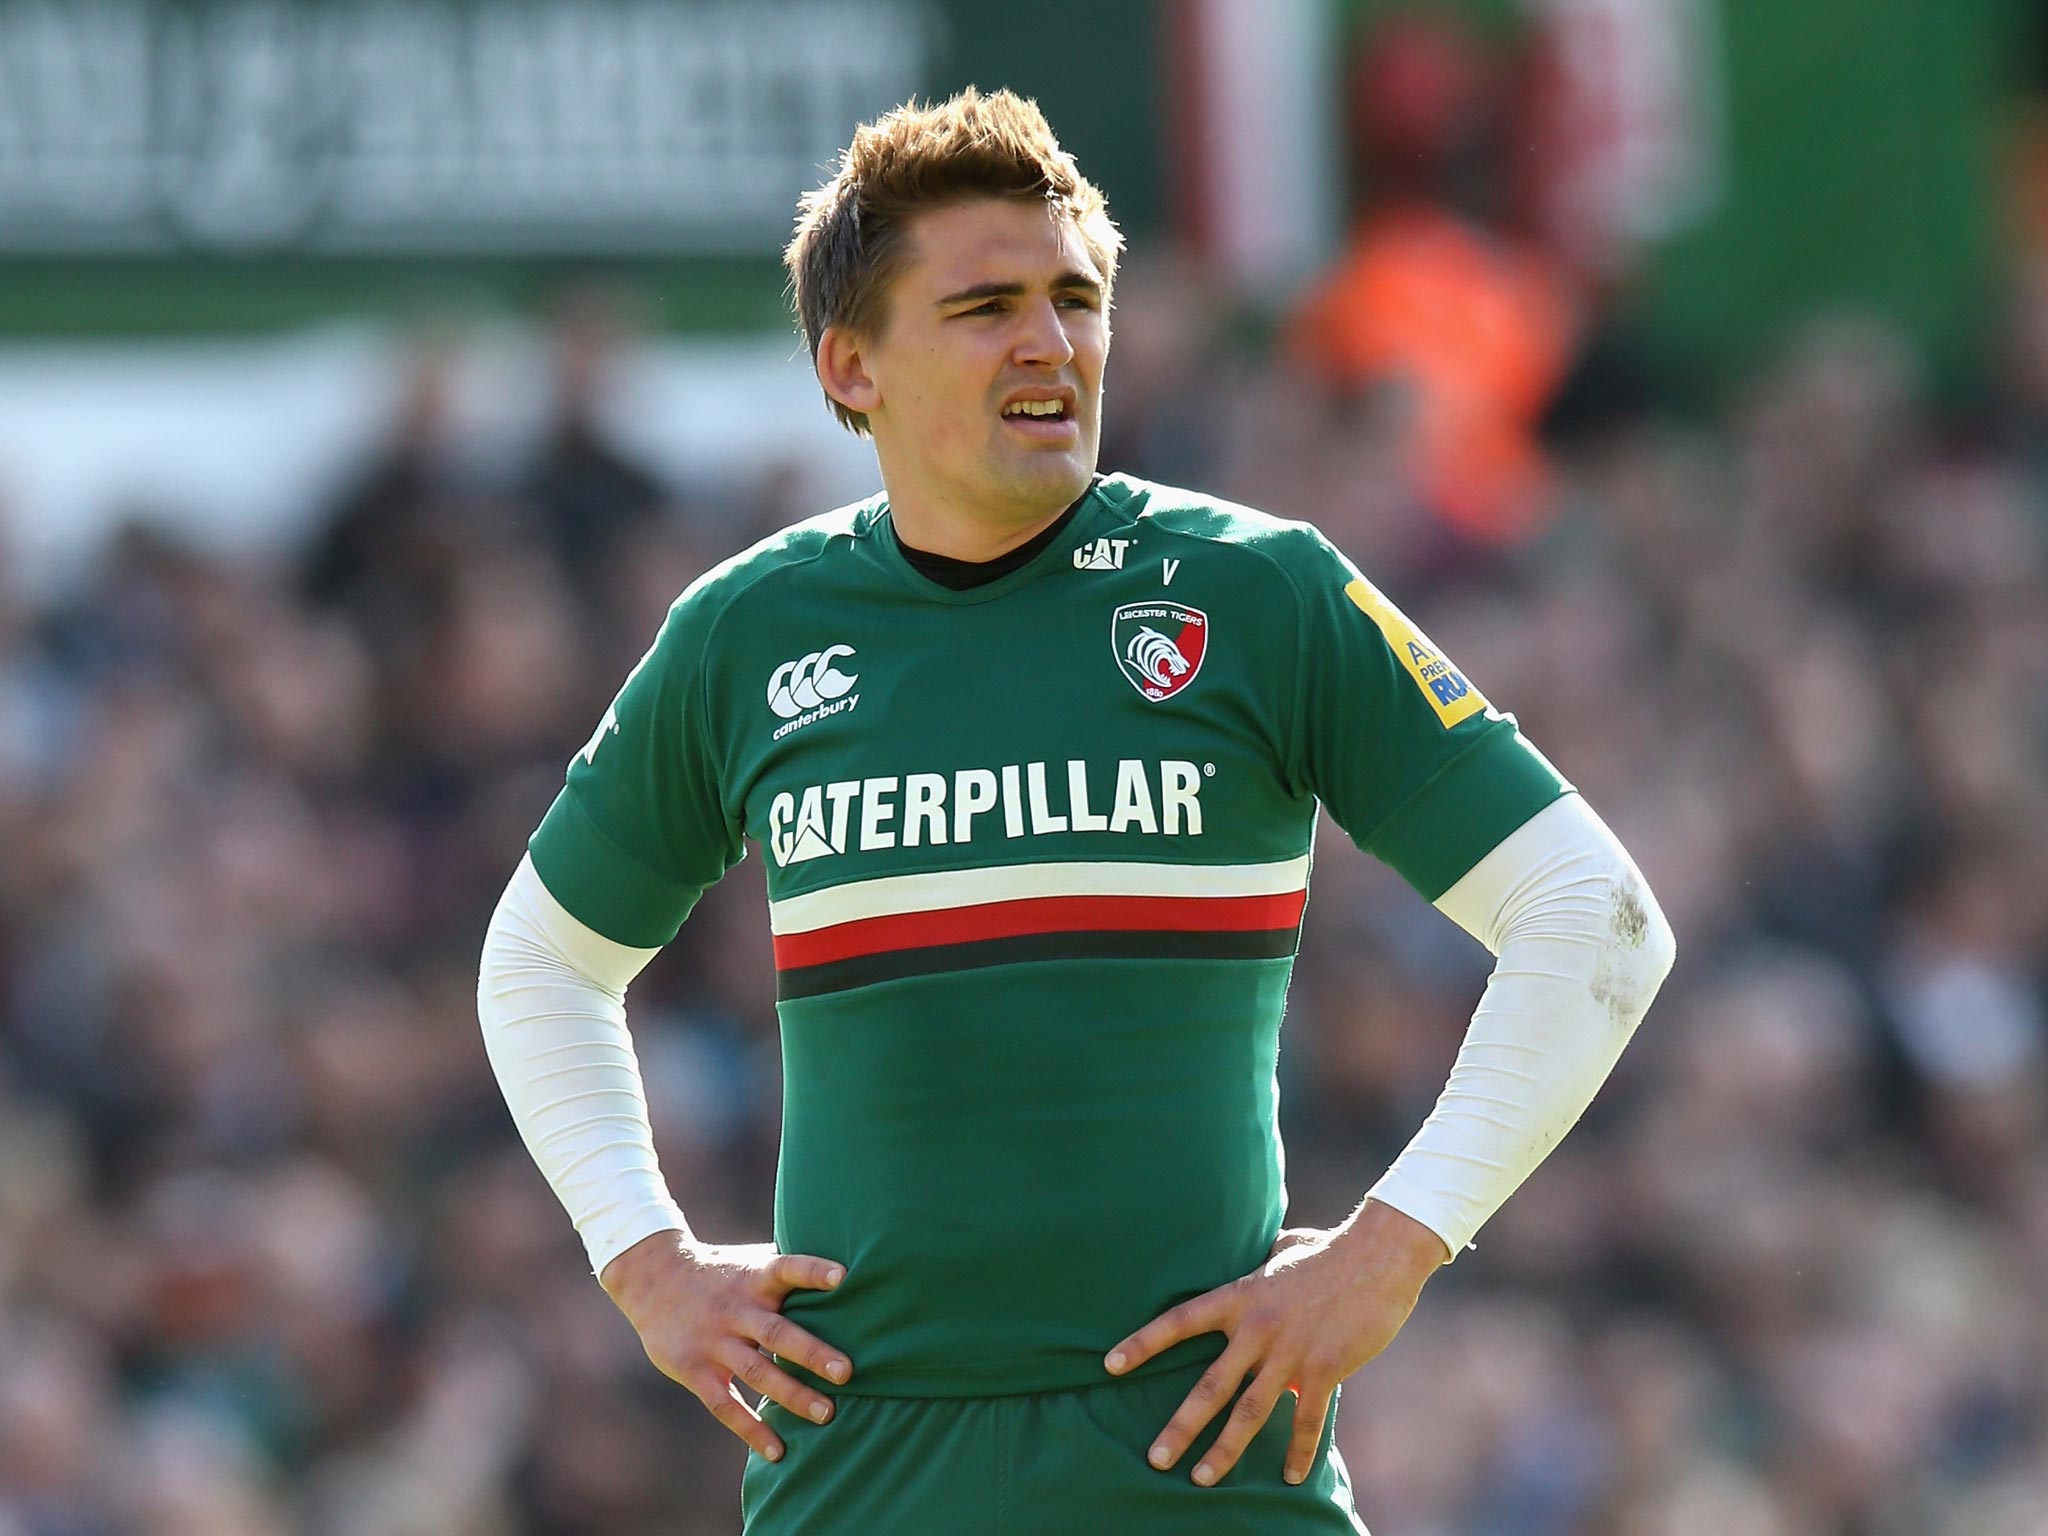 Fly-half Toby Flood will try to increase the Tigers’ chances of a top-two league finish tonight